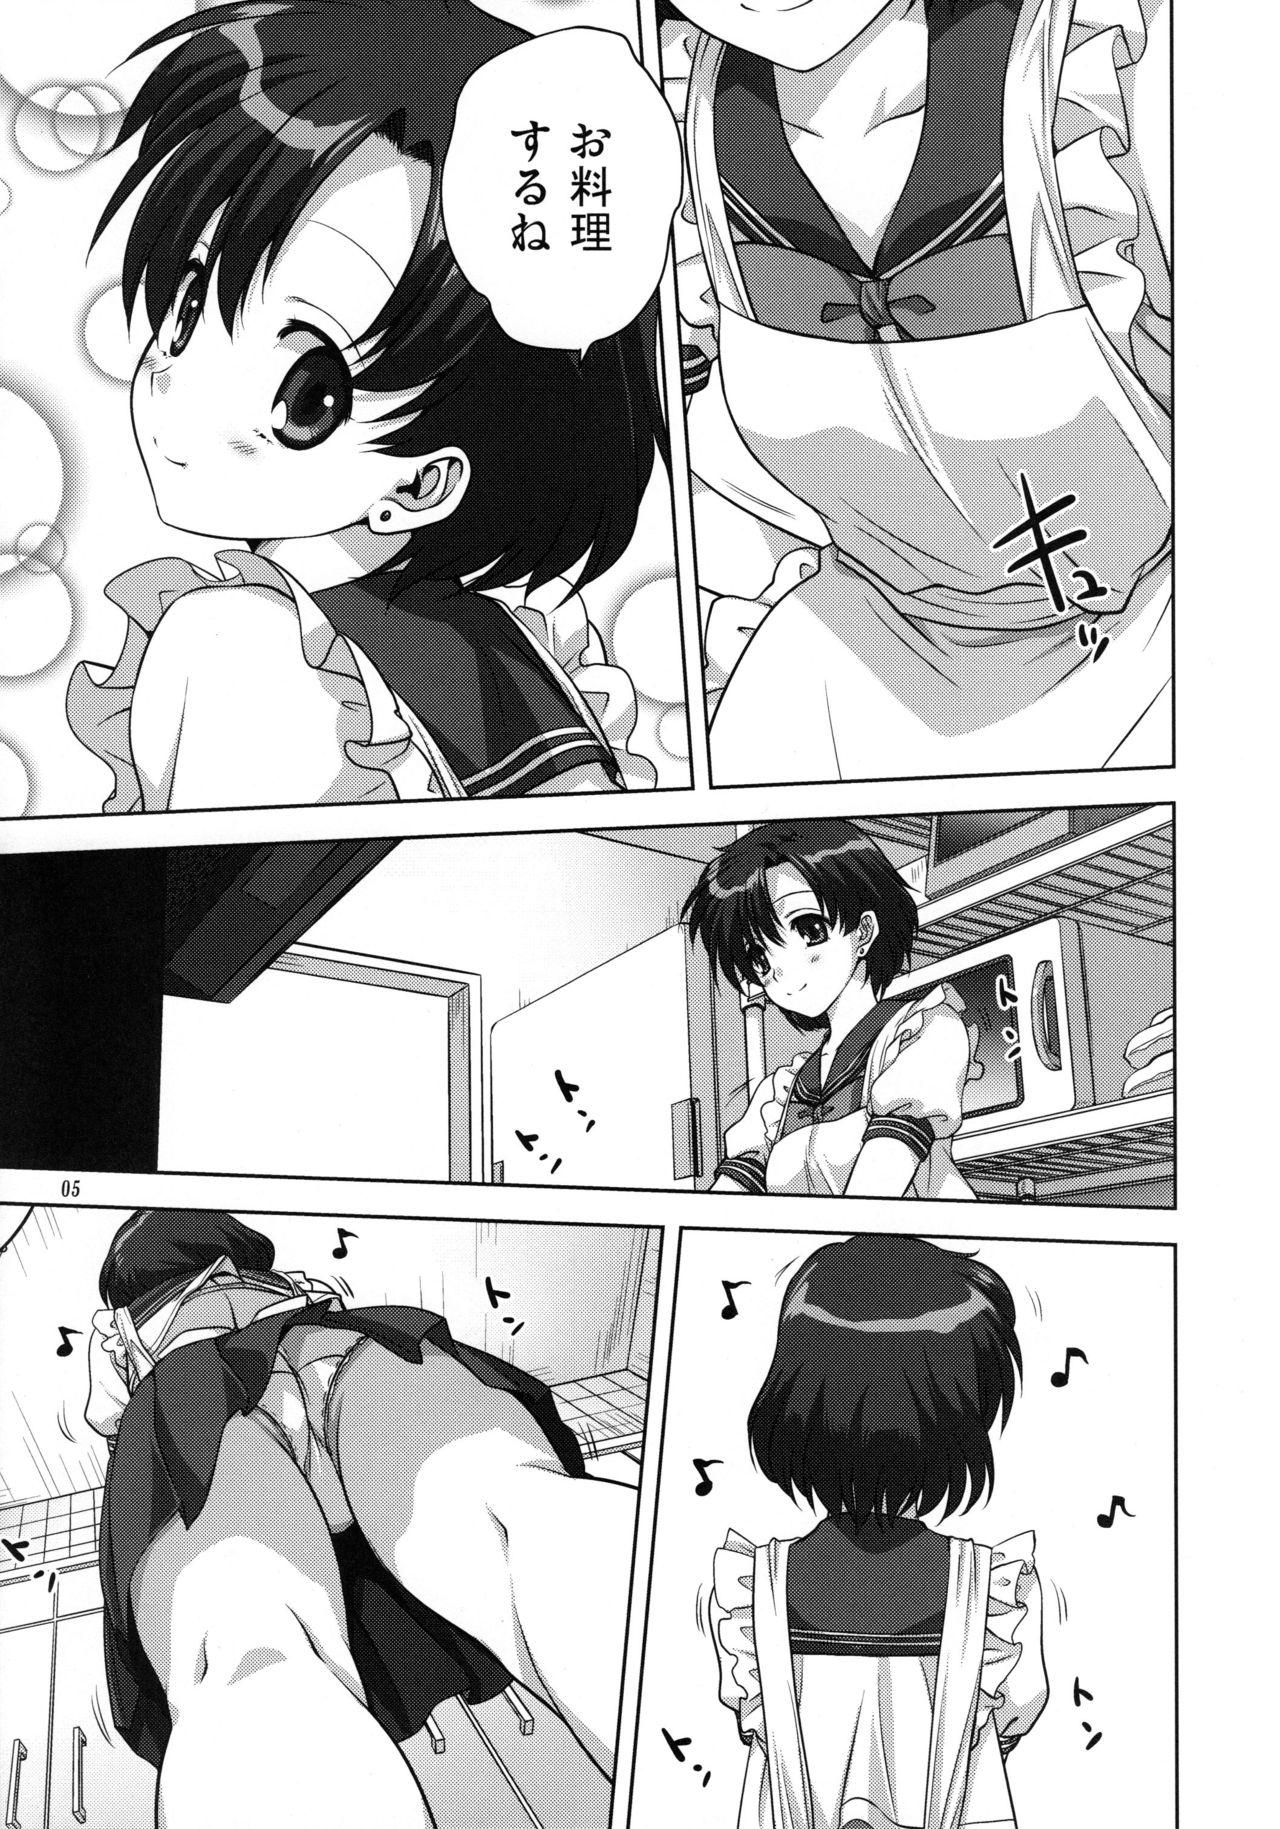 Groupfuck Ami-chan to Issho - Sailor moon Classic - Page 4